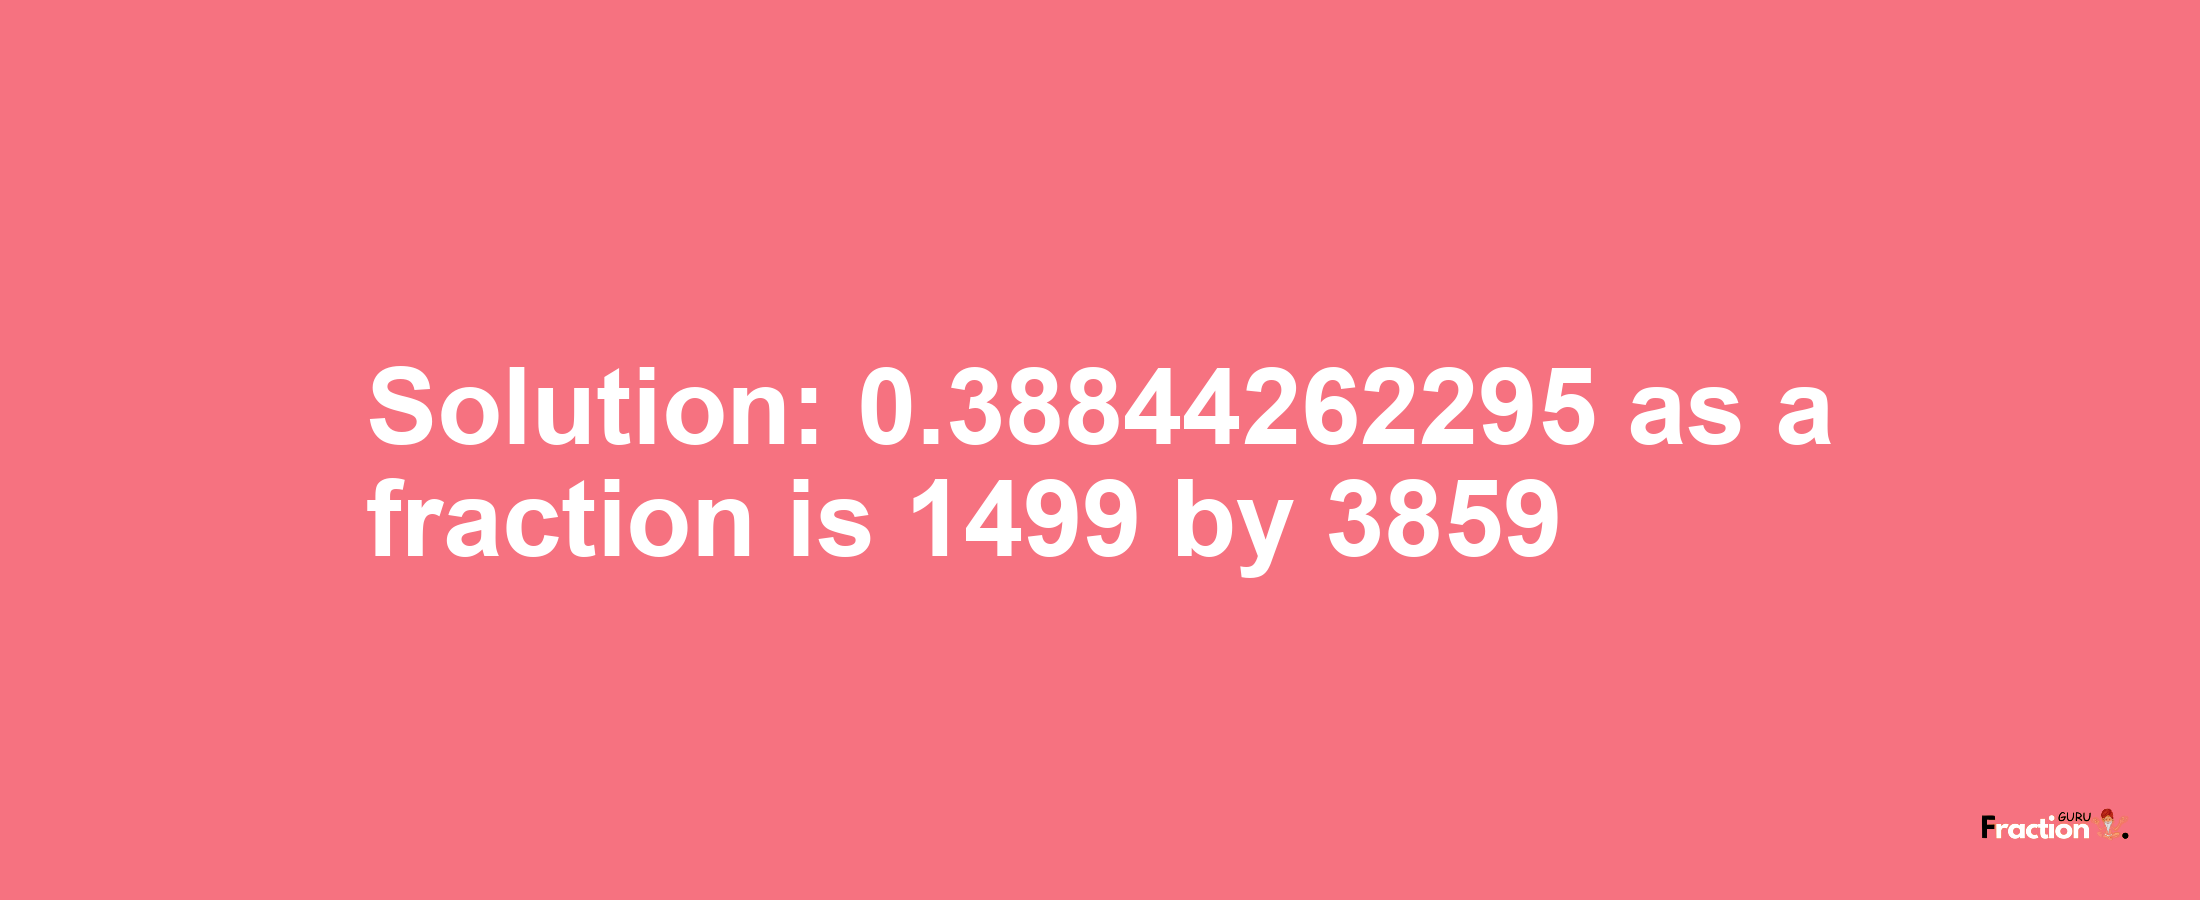 Solution:0.38844262295 as a fraction is 1499/3859